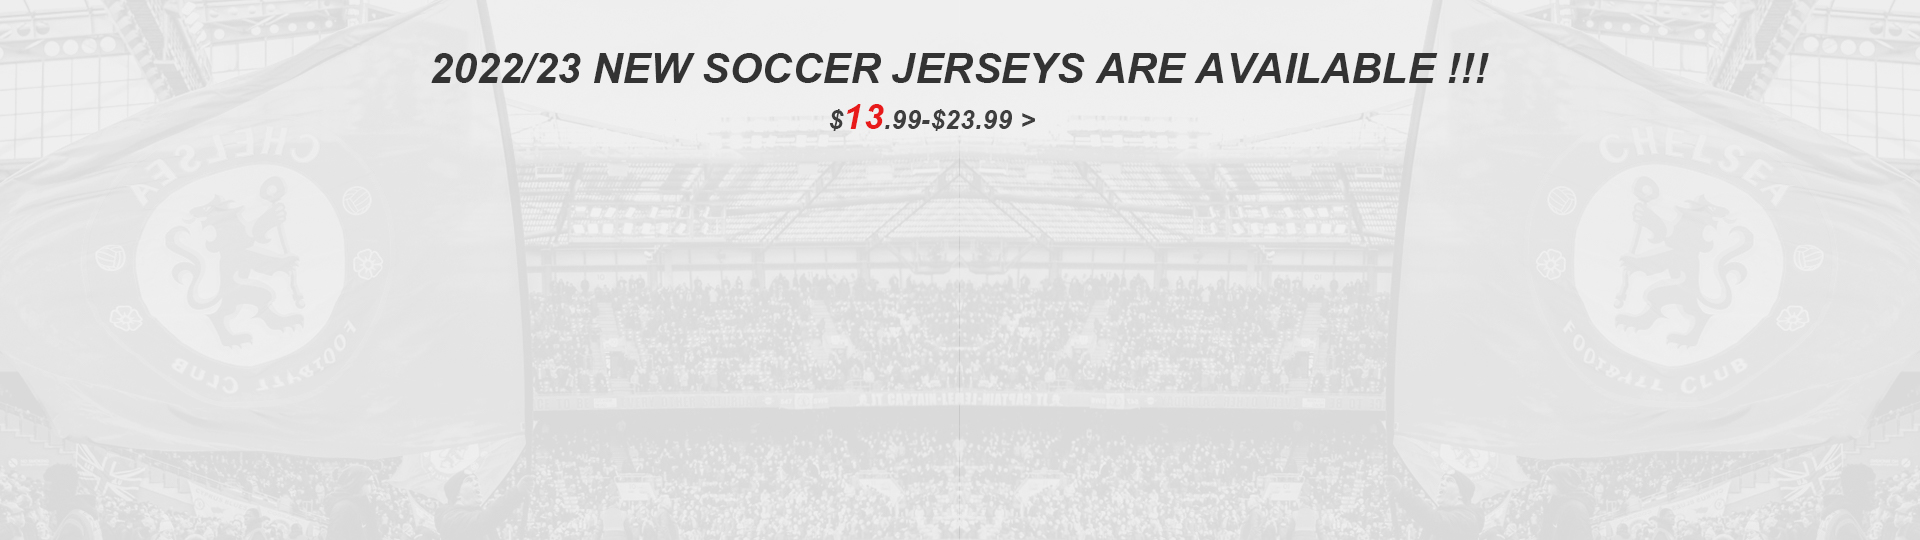 2022/23 NEW SOCCER JERSEYS ARE AVAILABLE